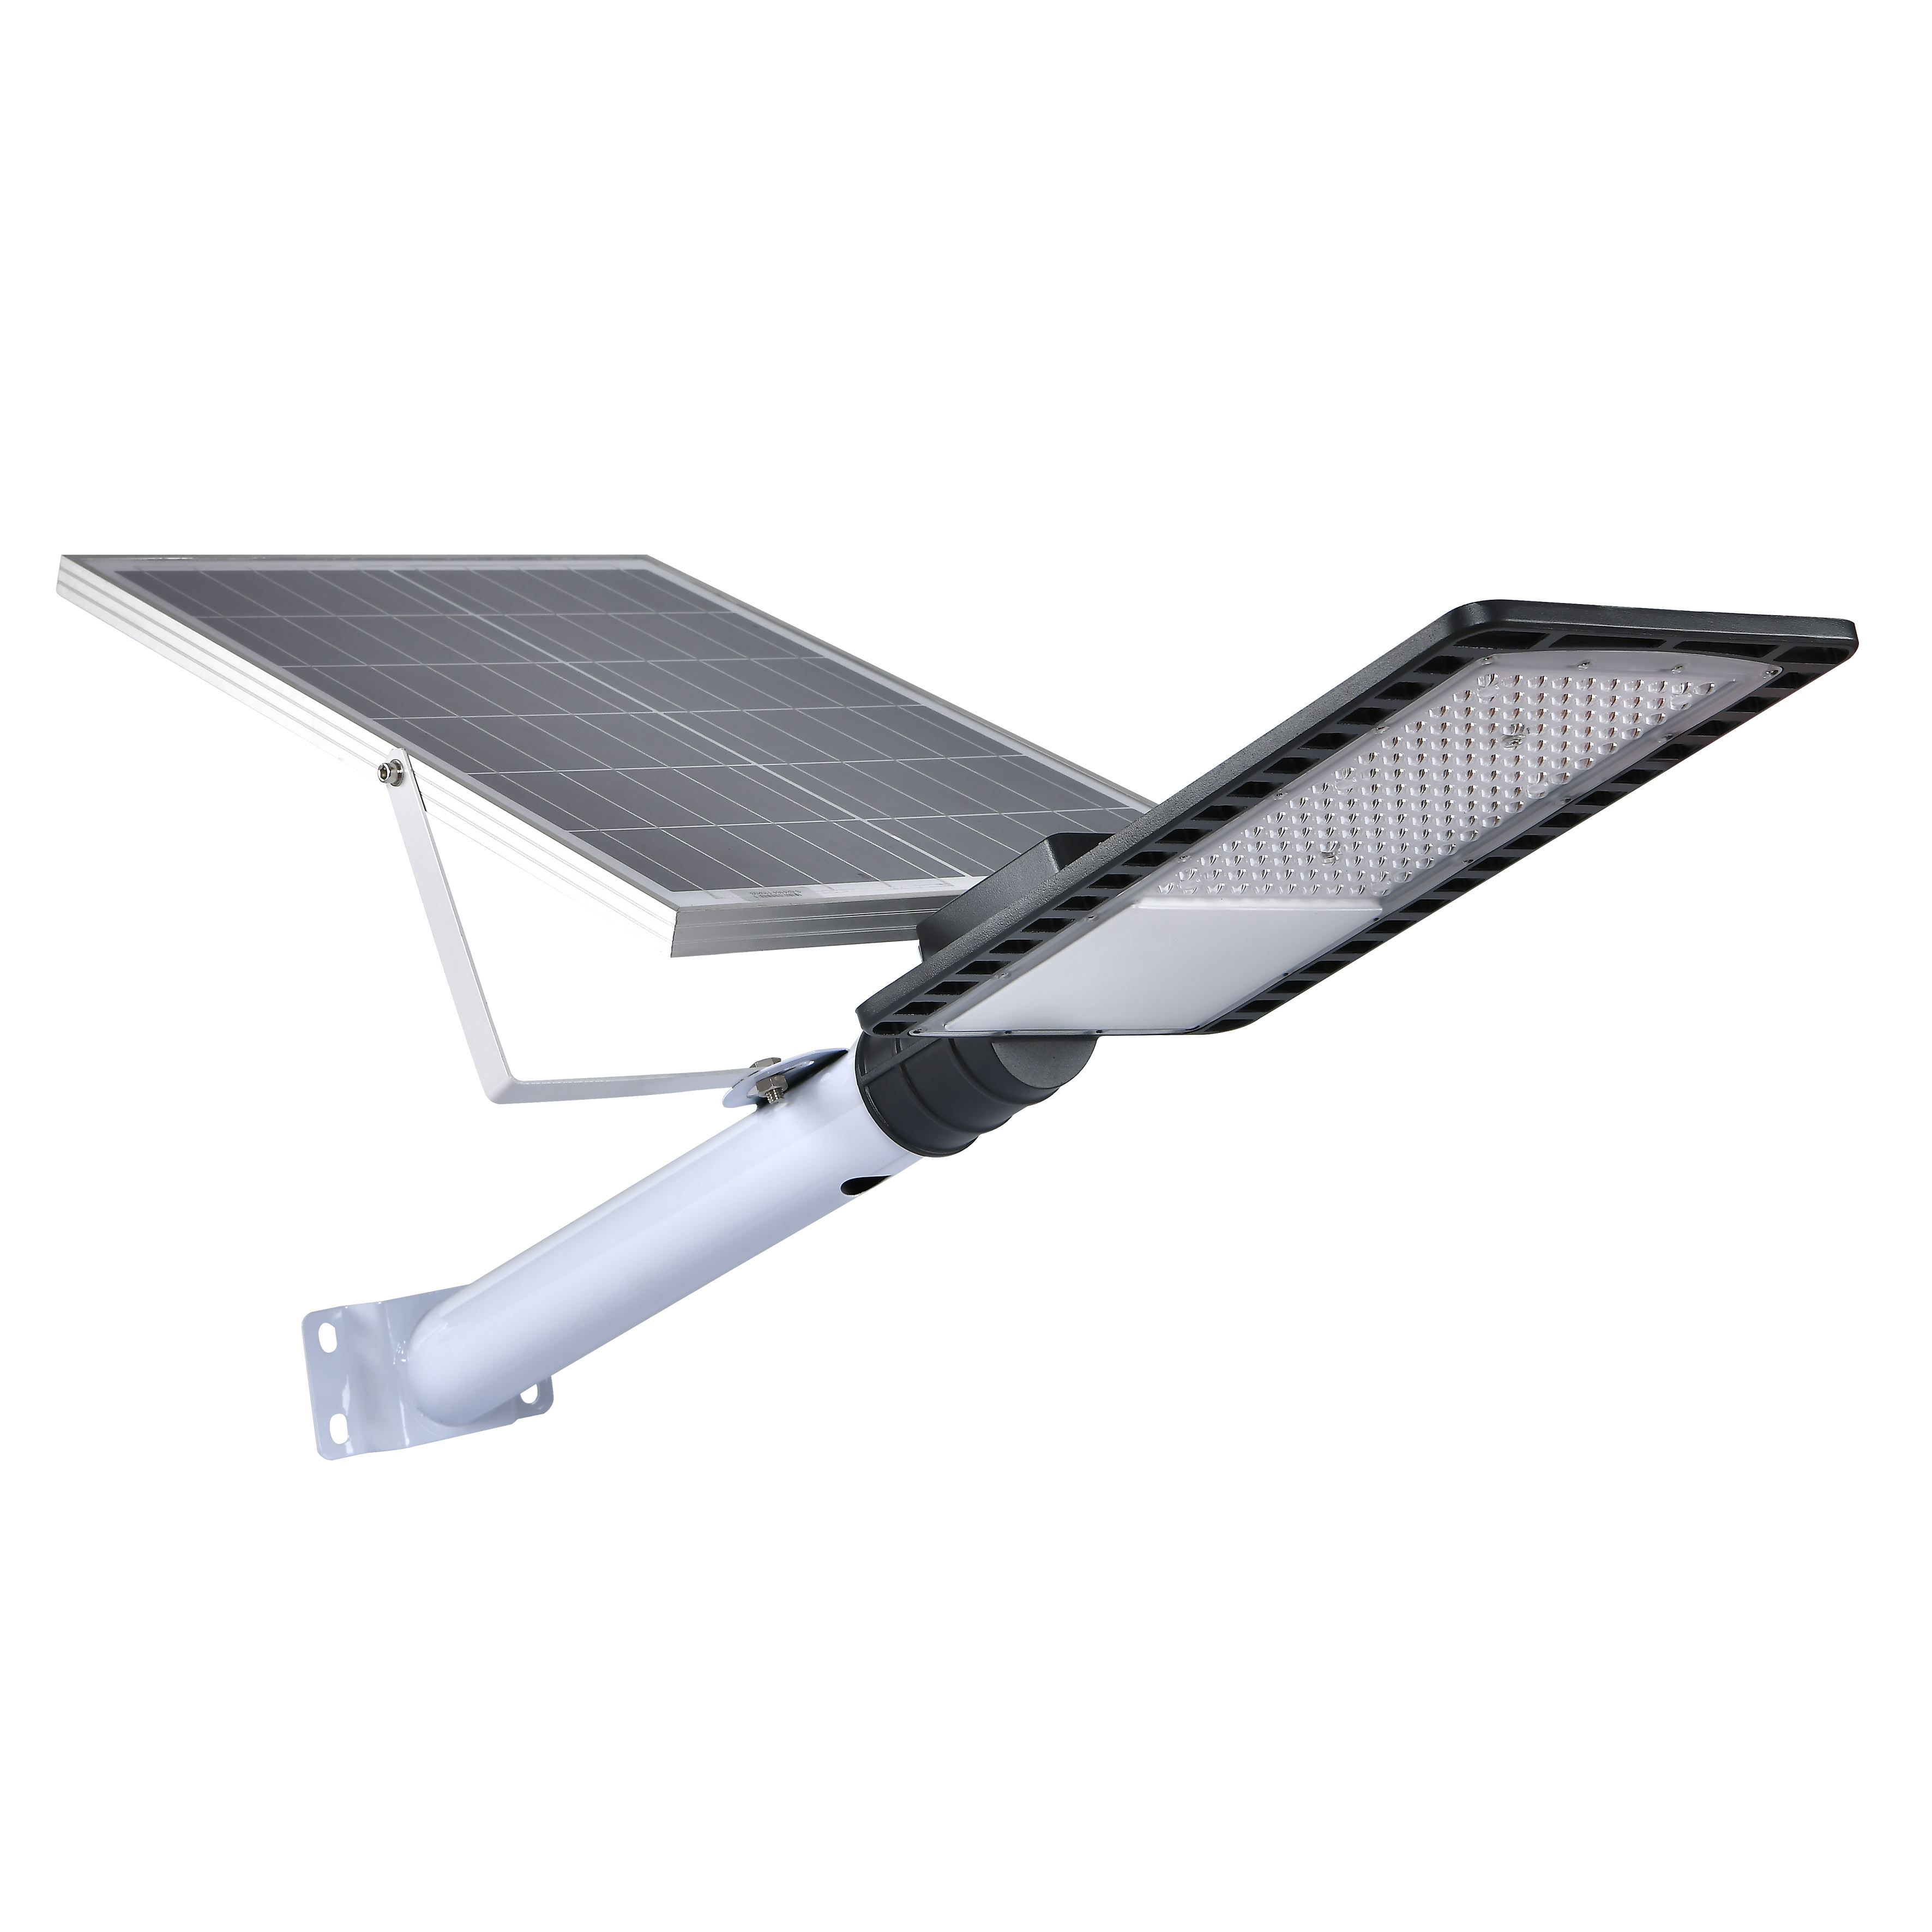 CET-160 street lamp for both mains and solar power